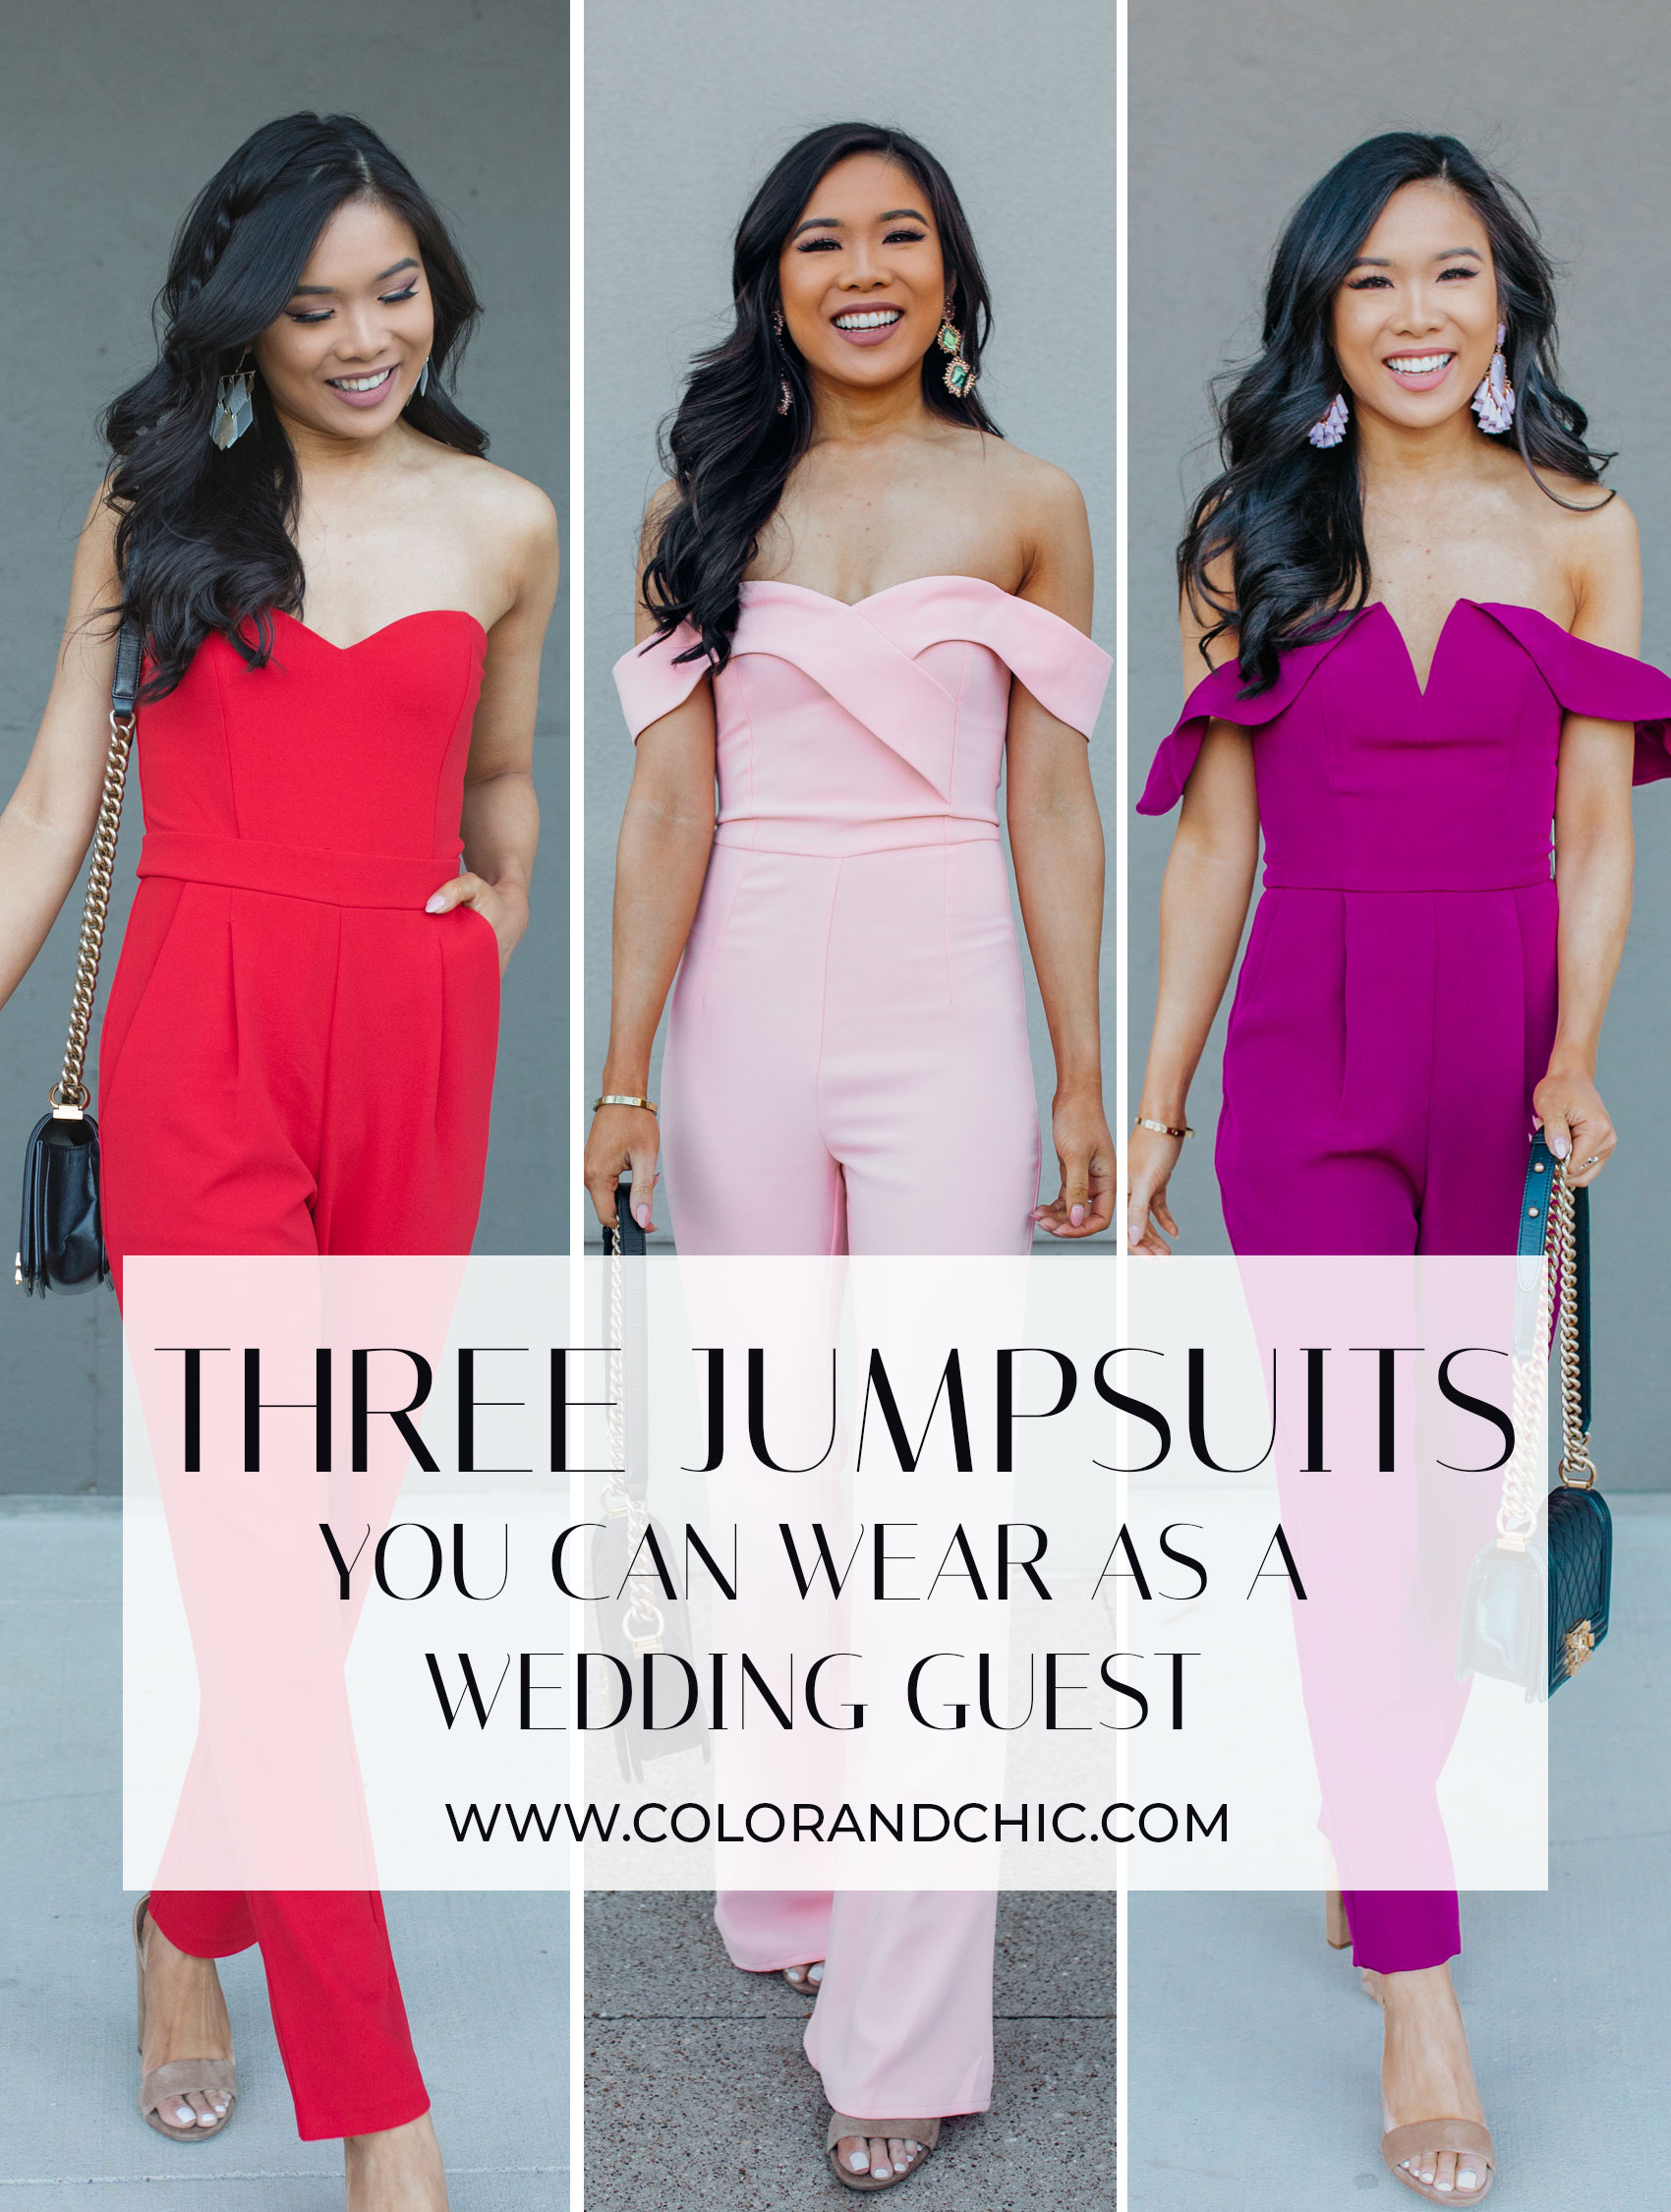 Three Jumpsuits you can wear as a wedding guest